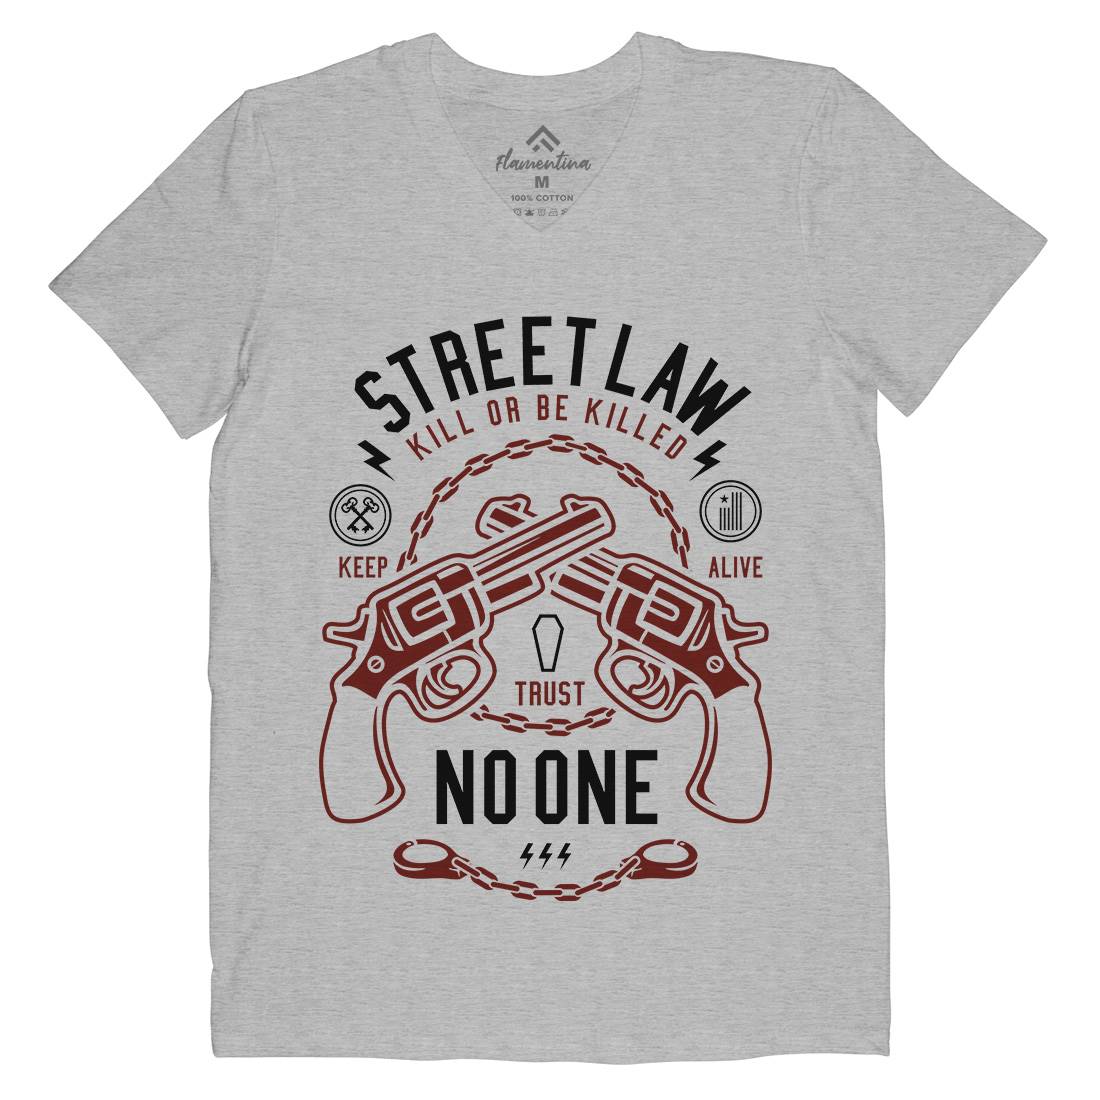 Street Law Mens V-Neck T-Shirt Quotes A286